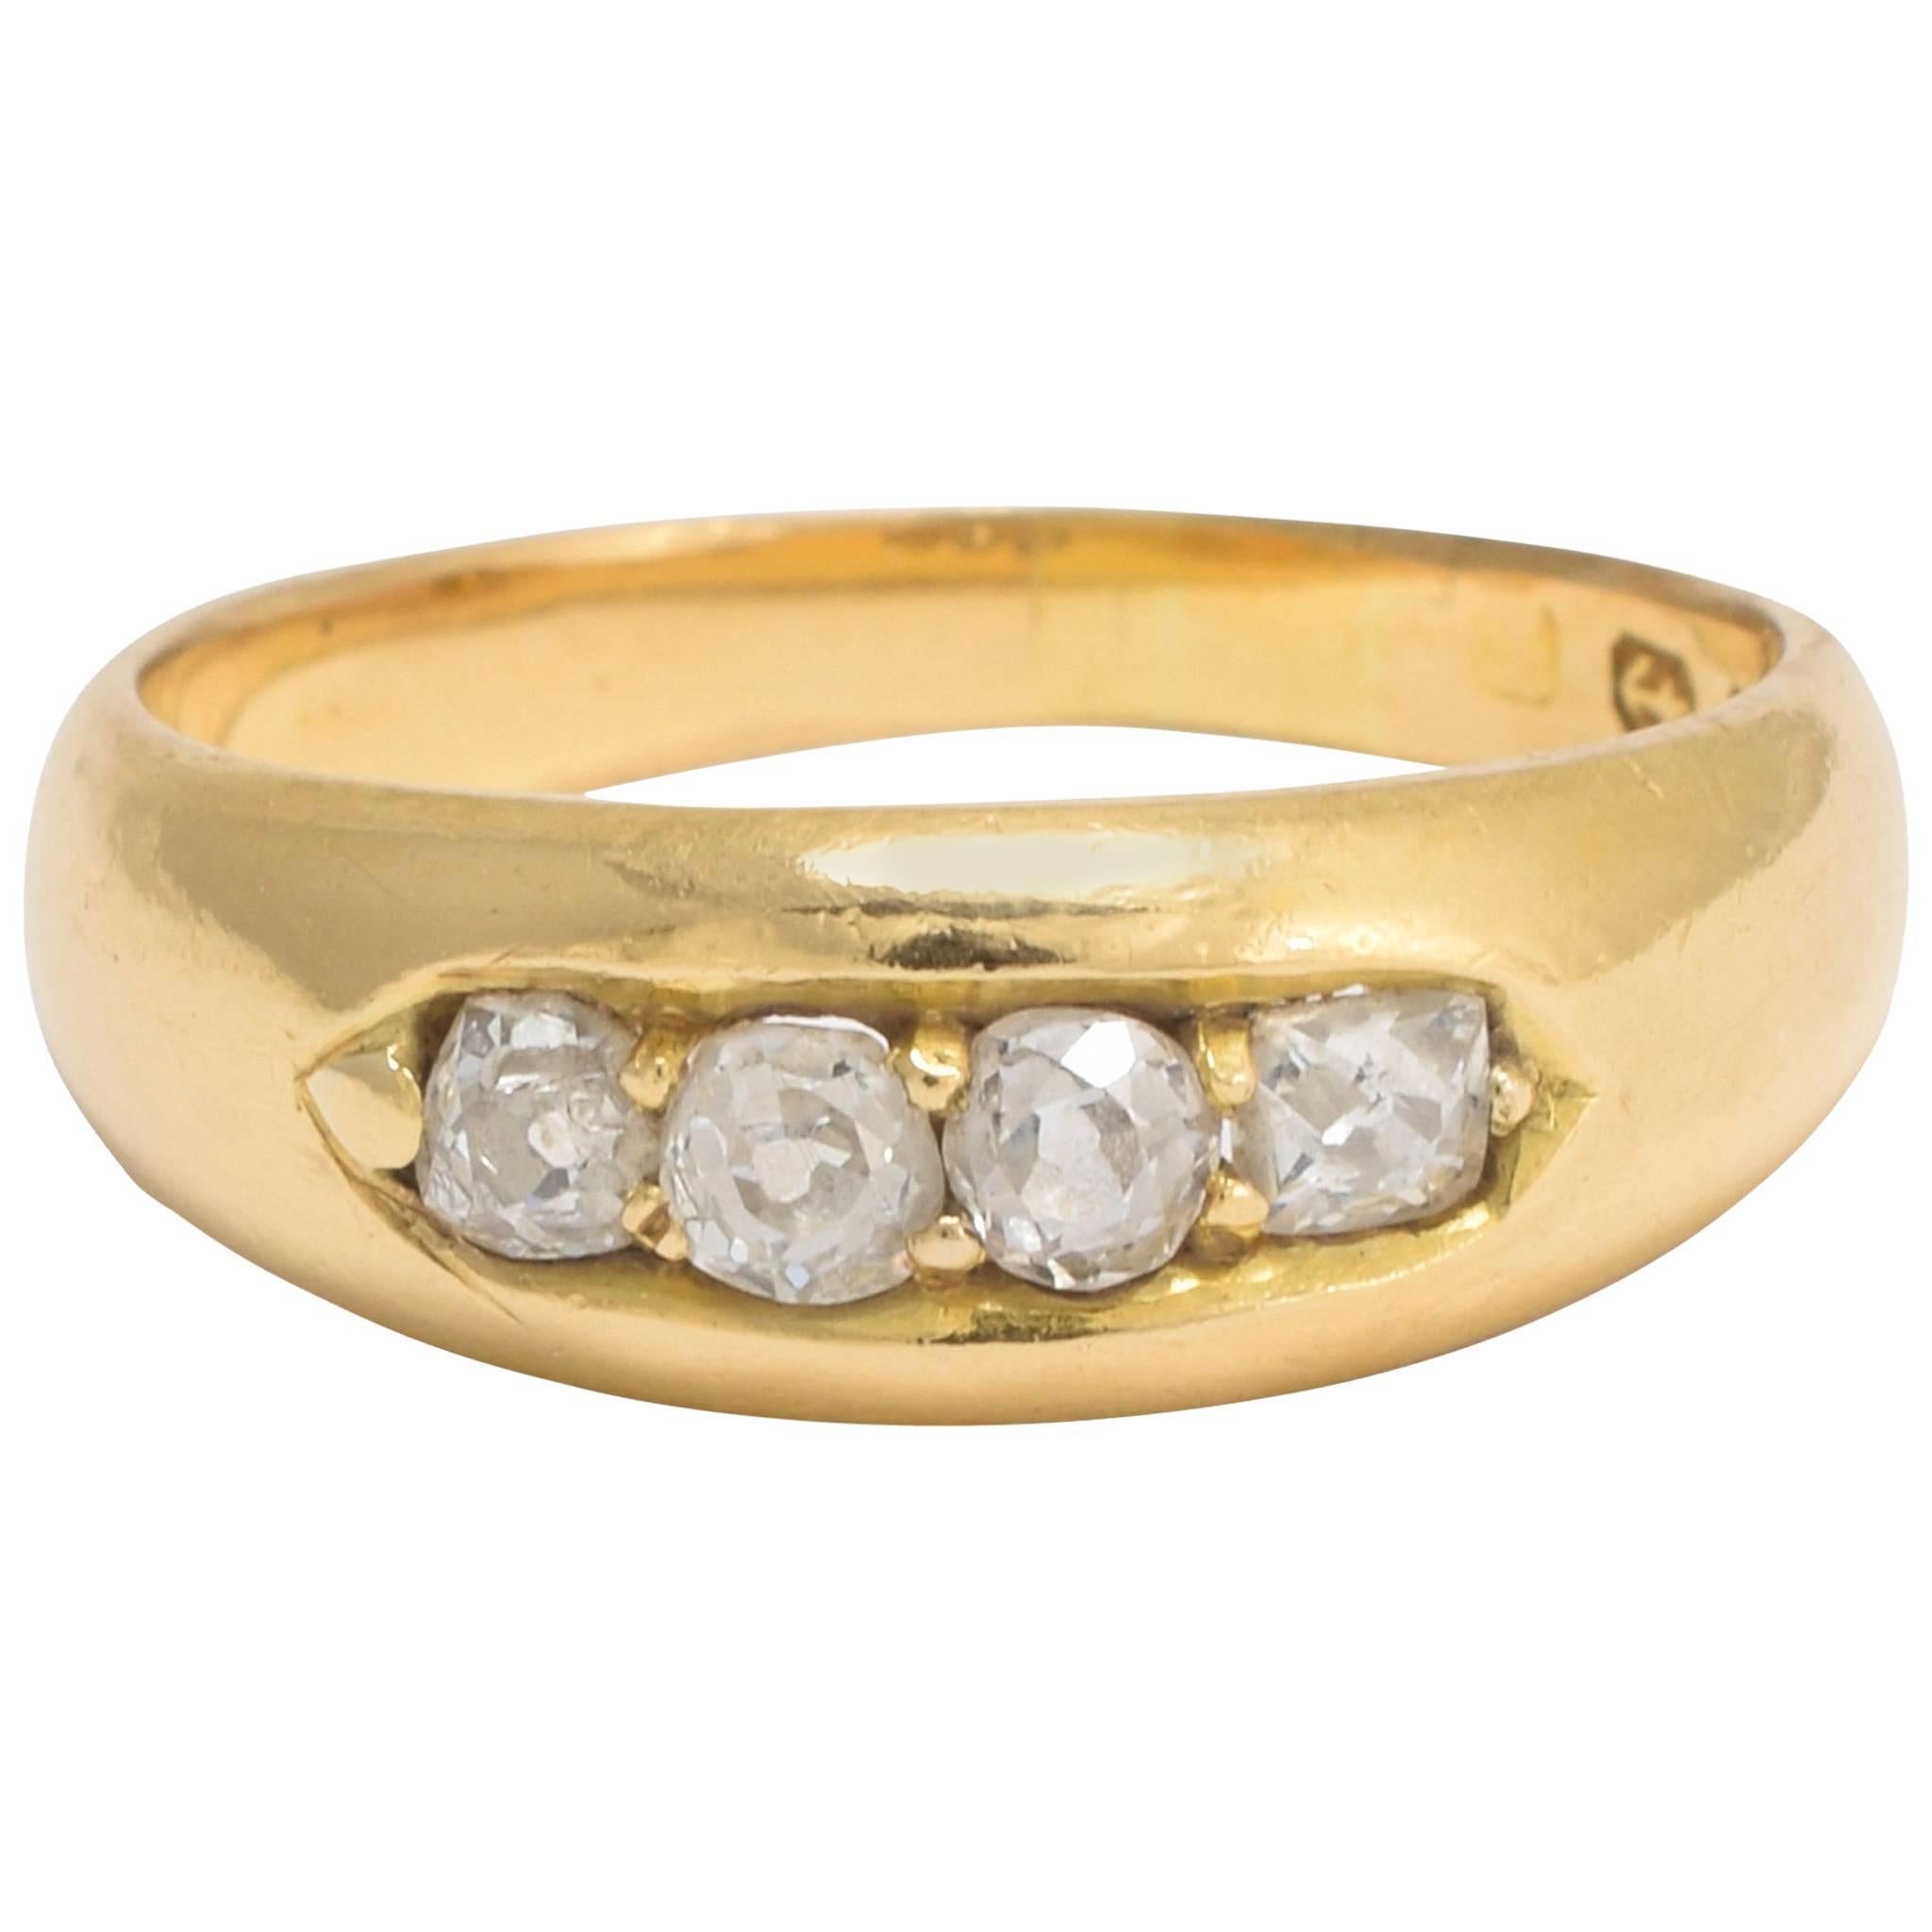 Antique Victorian Four Diamond Gold Band Ring